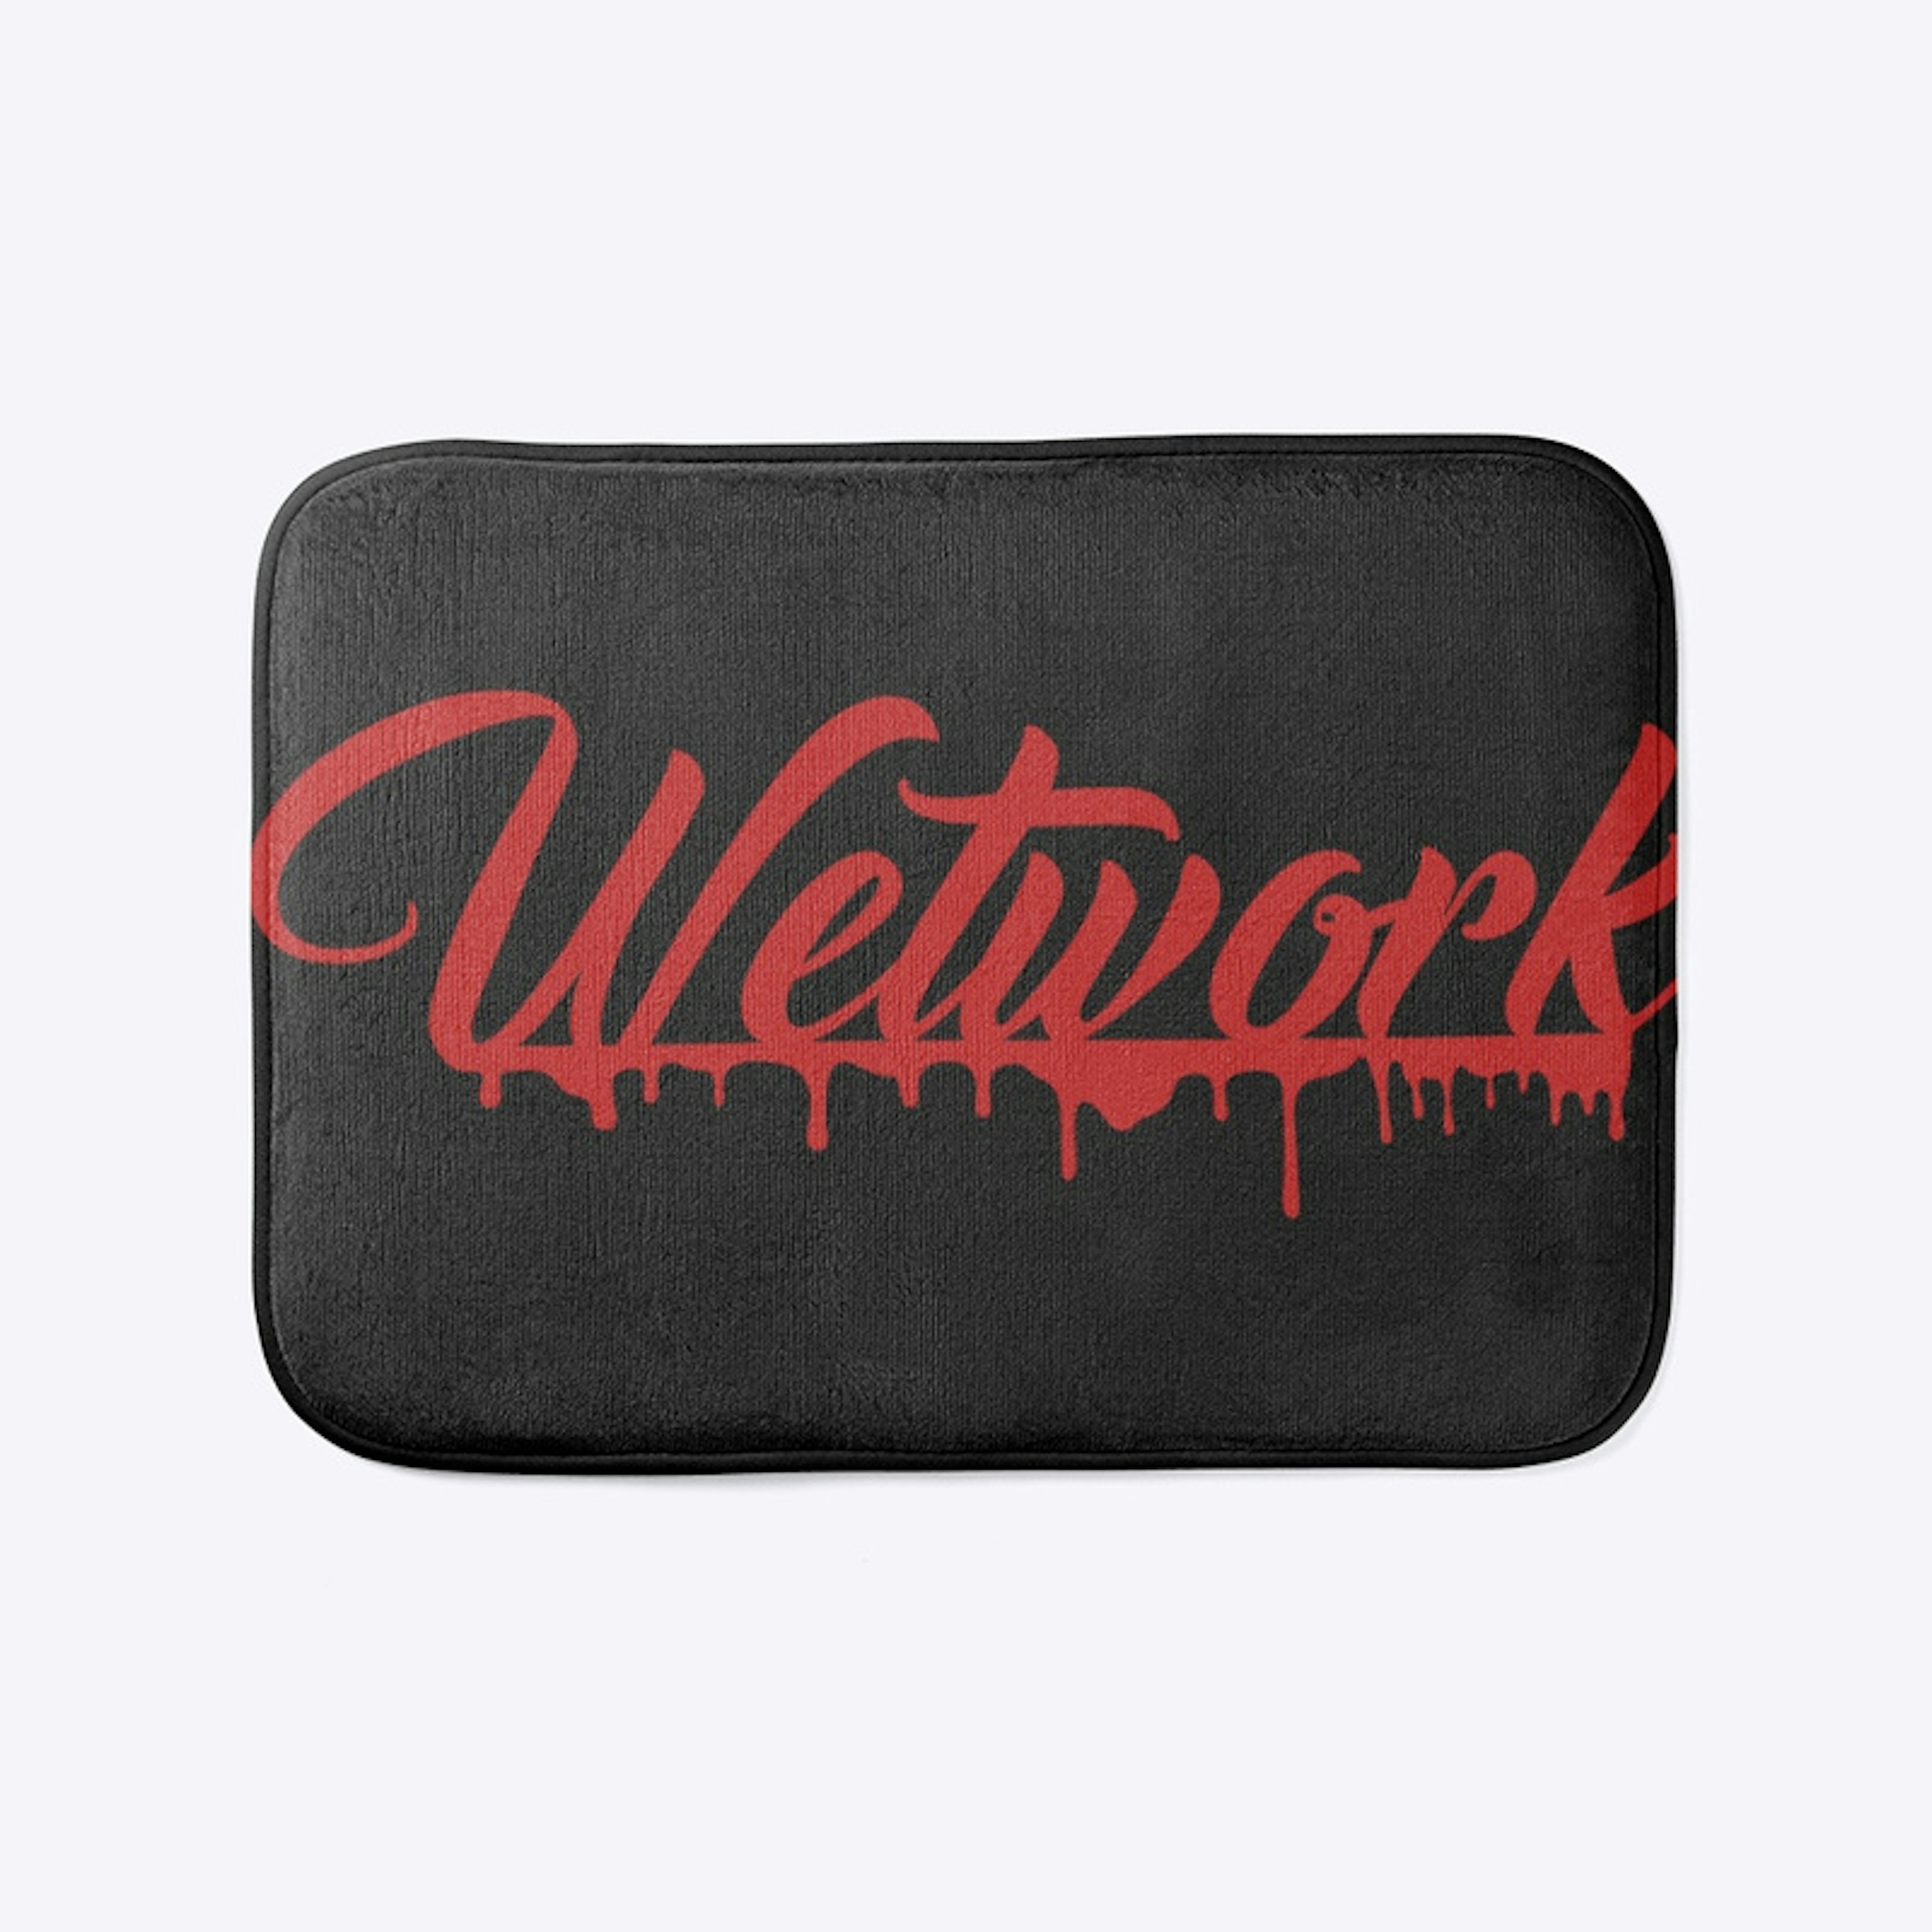 Wetwork Collection 